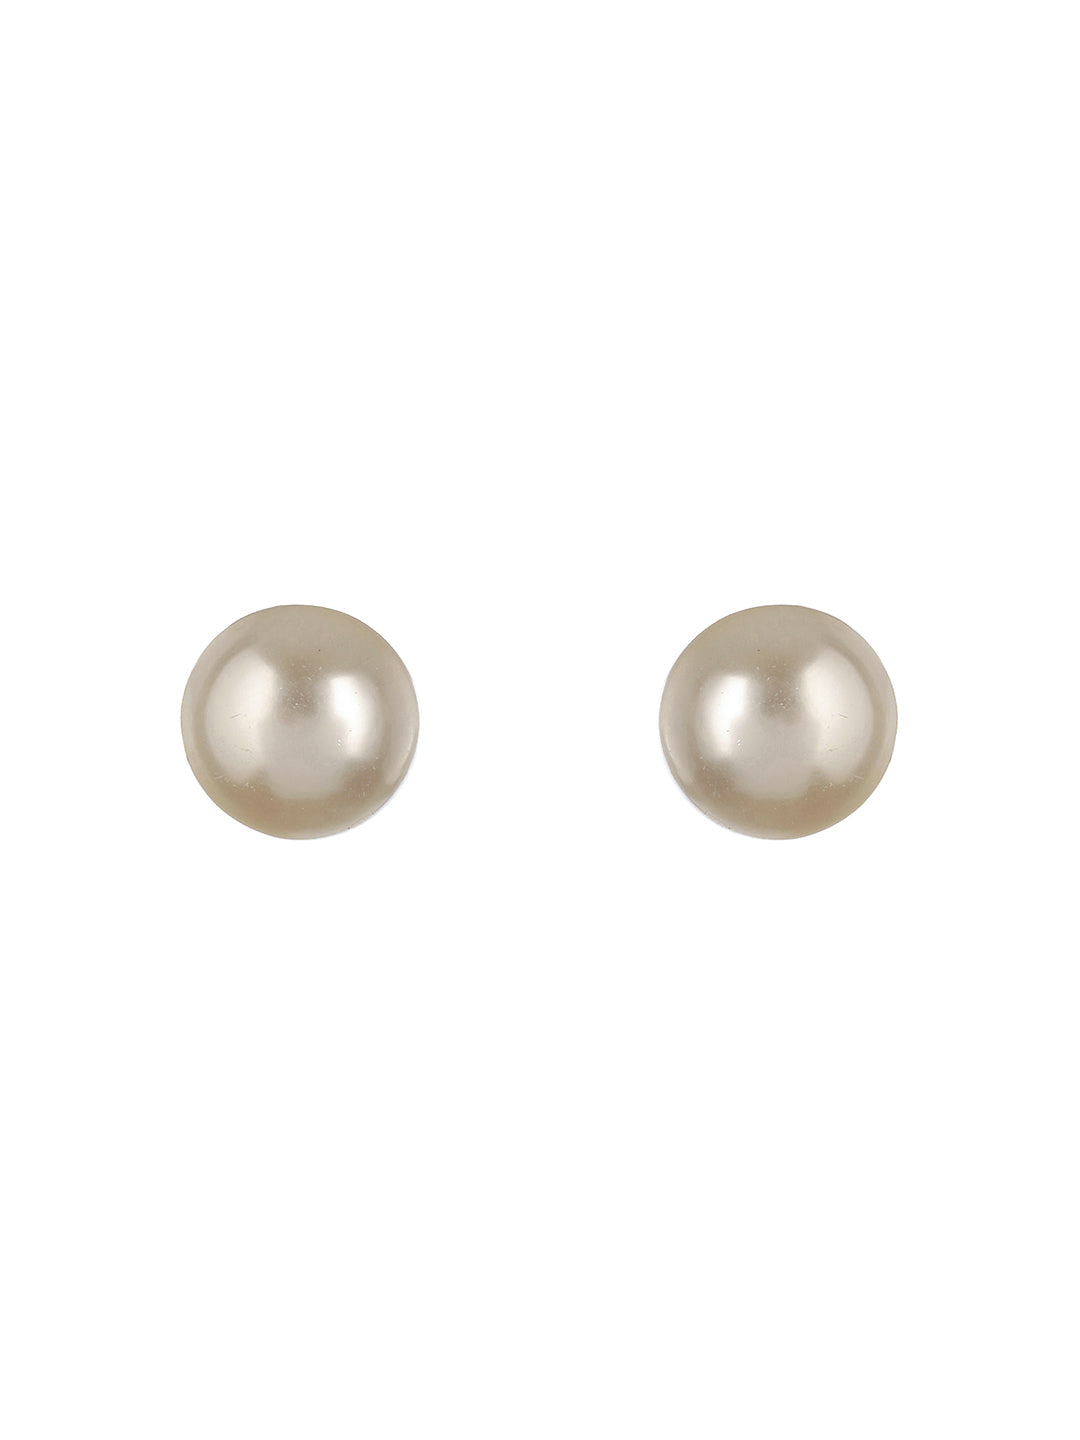 Set of 4 White Contemporary Studs Earrings